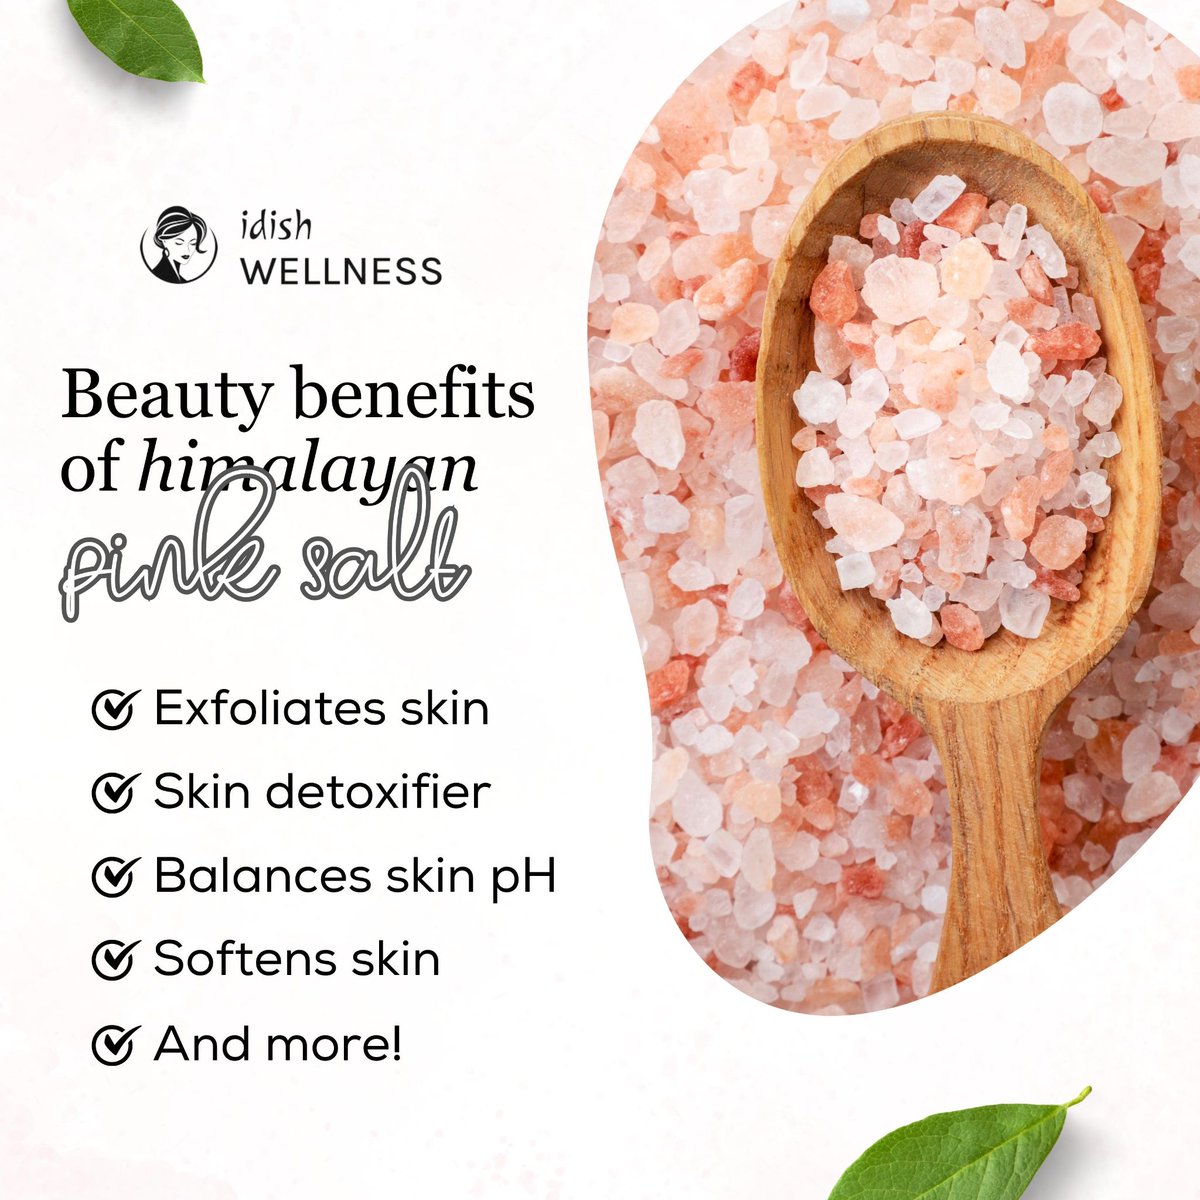 Unveil the ancient beauty secrets of Himalayan Pink Salt, a natural wonder for your skin! This mineral-rich salt not only exfoliates and detoxifies your skin but also restores the perfect pH balance, leaving it irresistibly soft and radiant.
.
#idishwellness #himalayanpinksalt